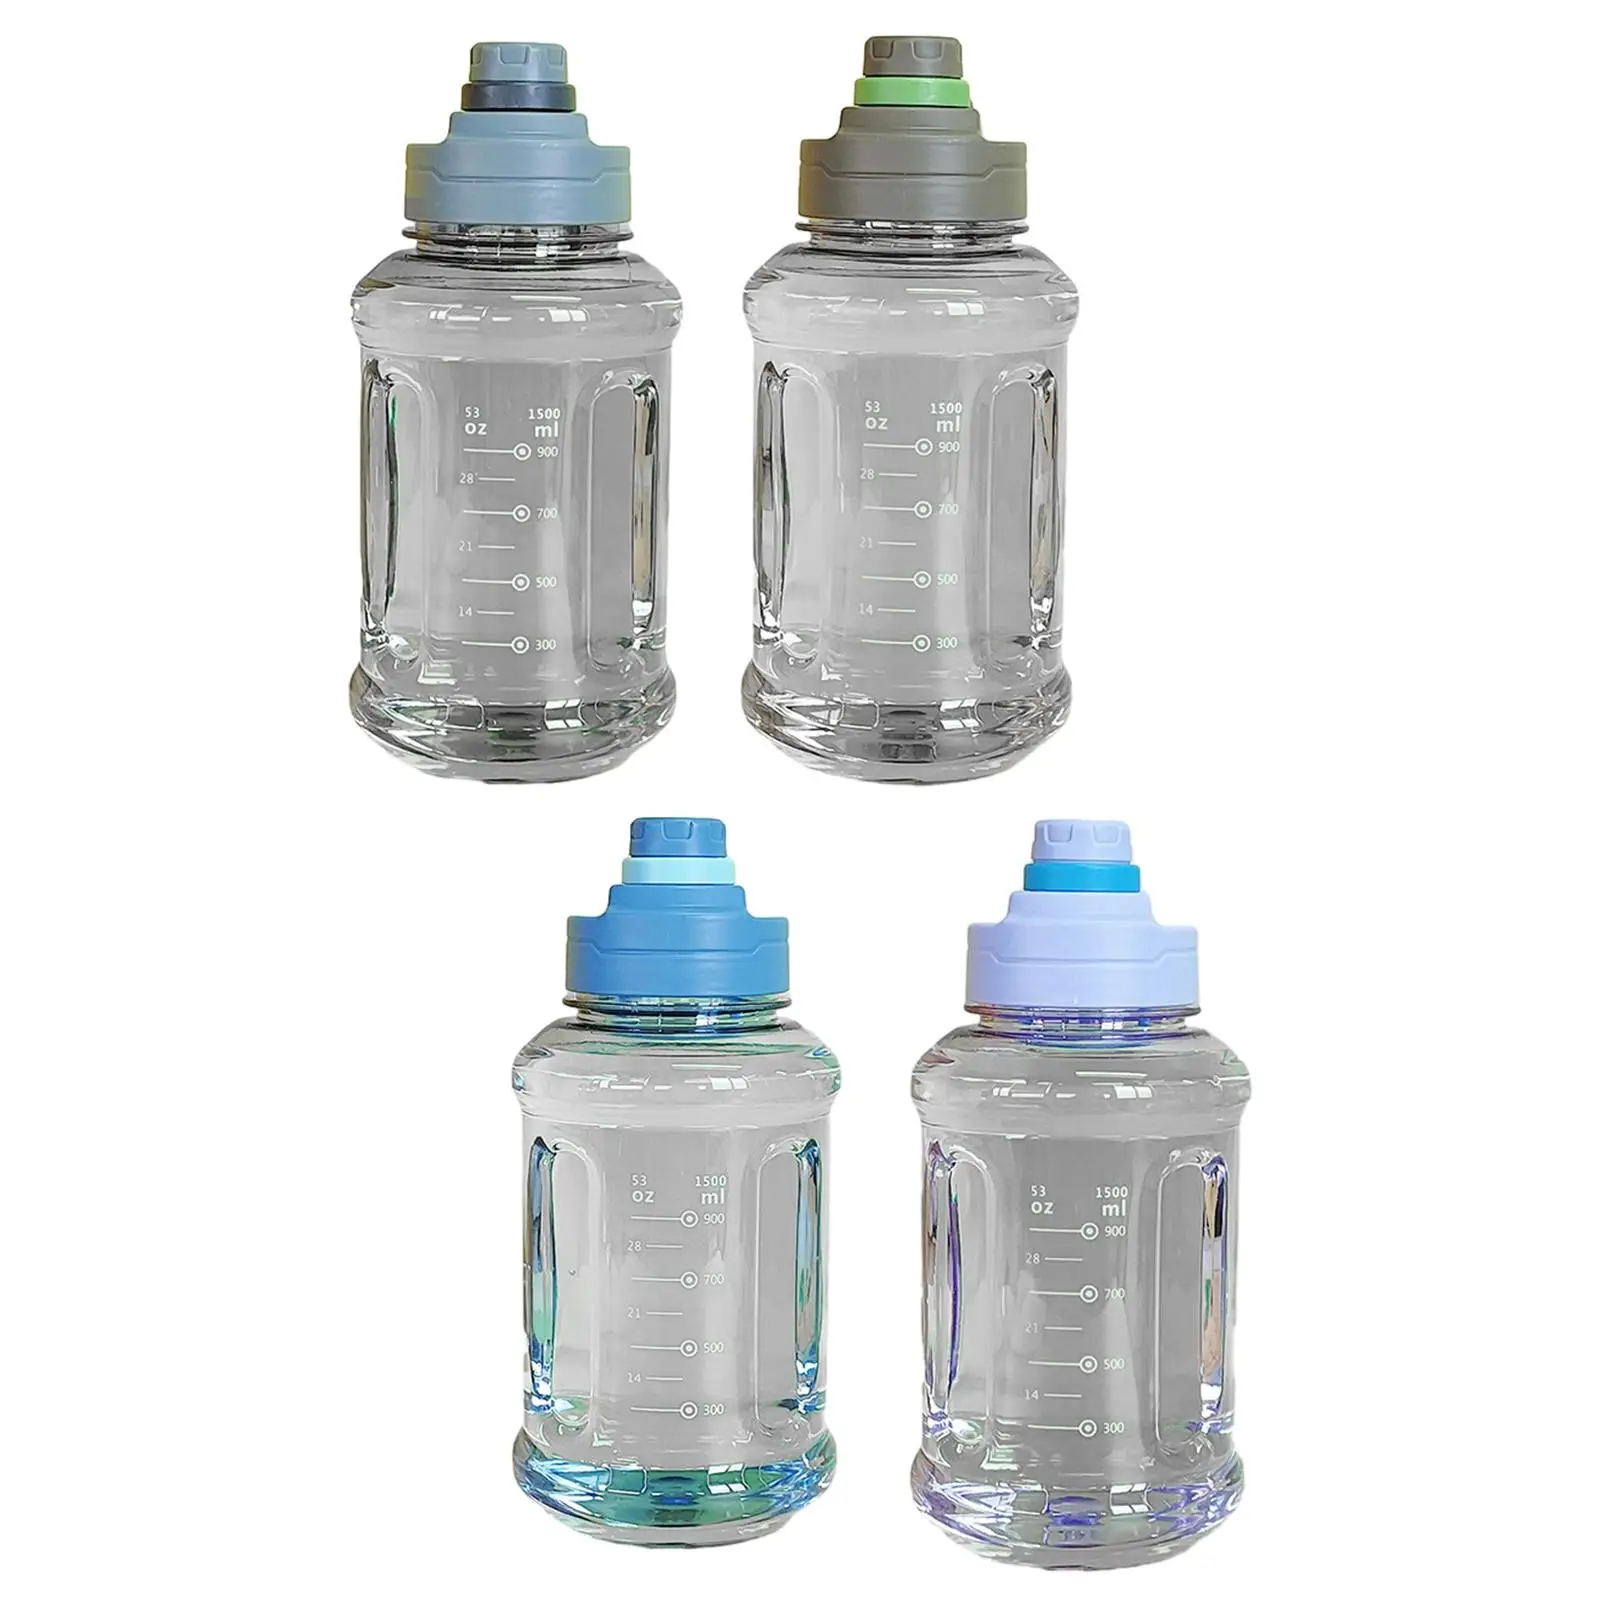 Big Water Bottle 1500ml Leakproof Easy to Use Fitness Accessories Outdoor Travel Fitness Bottle Sports Water Bottle Gym Bottle